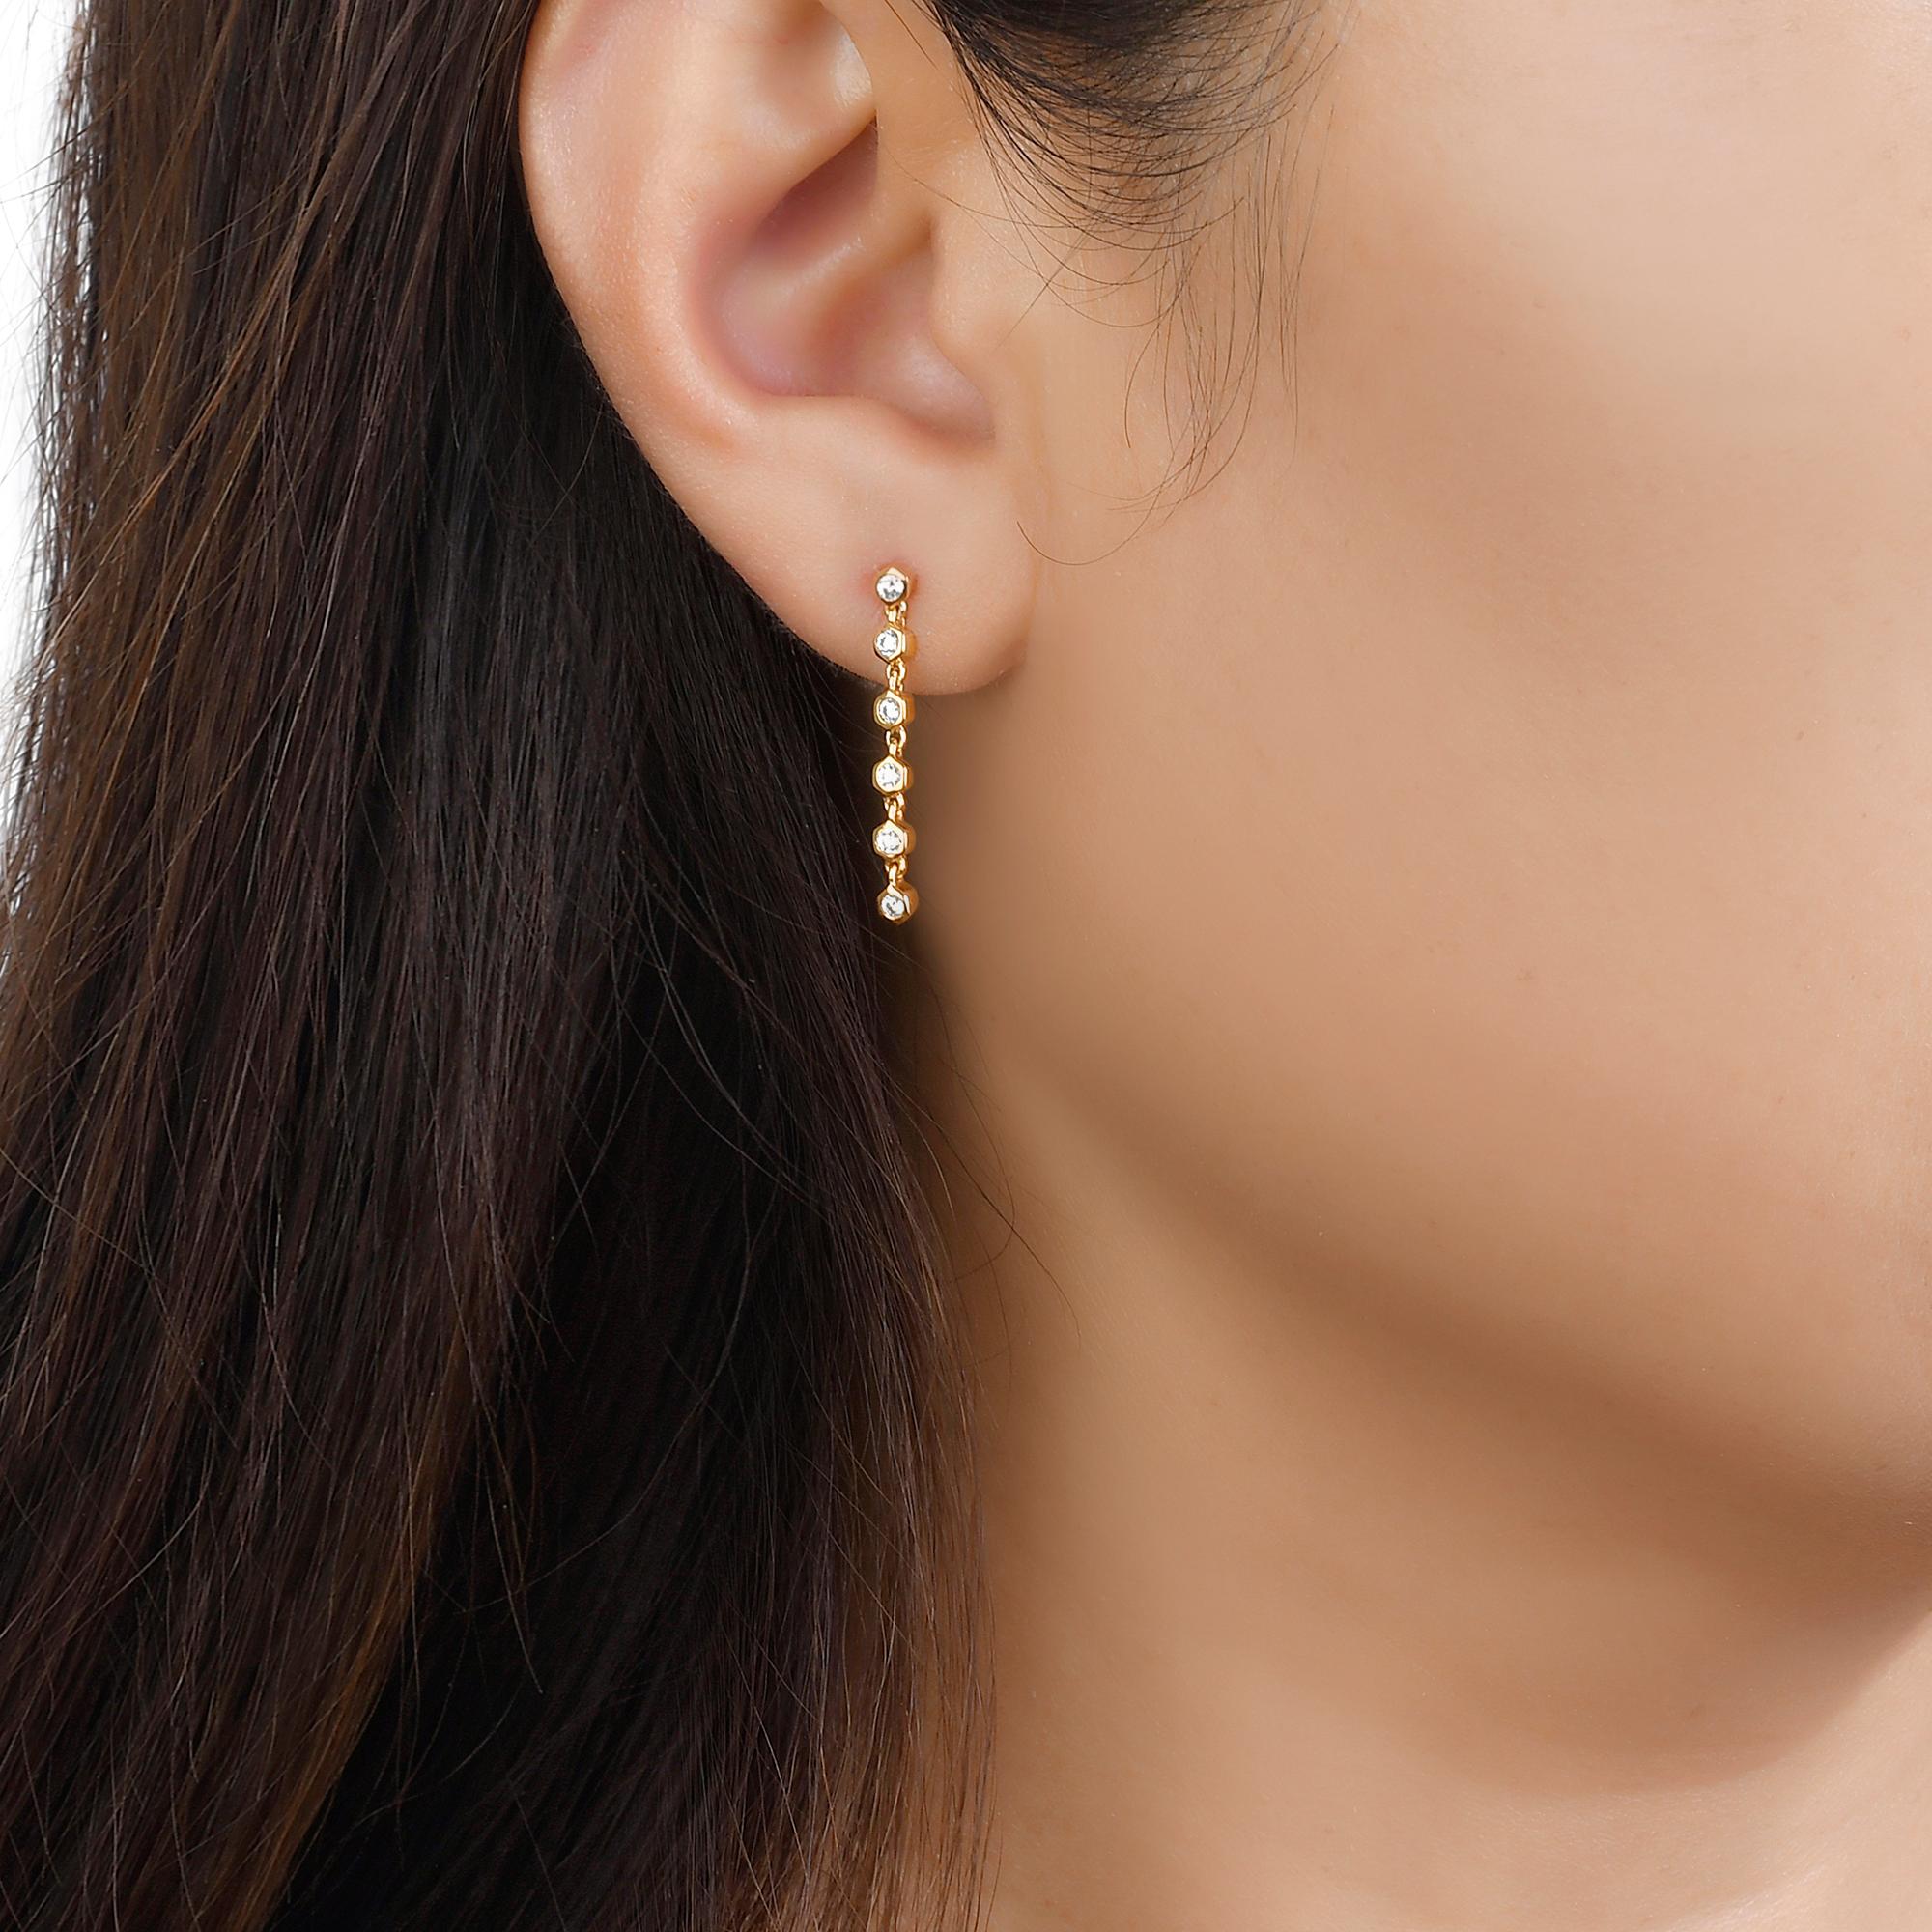 Discover the new classic in everyday fine jewelry. An updated twist to a classic piece, the Mini Honeycomb Diamond Dangling Earrings is perfect for every day wear. Elevate your essentials and add elegance to your style with this design remix of a